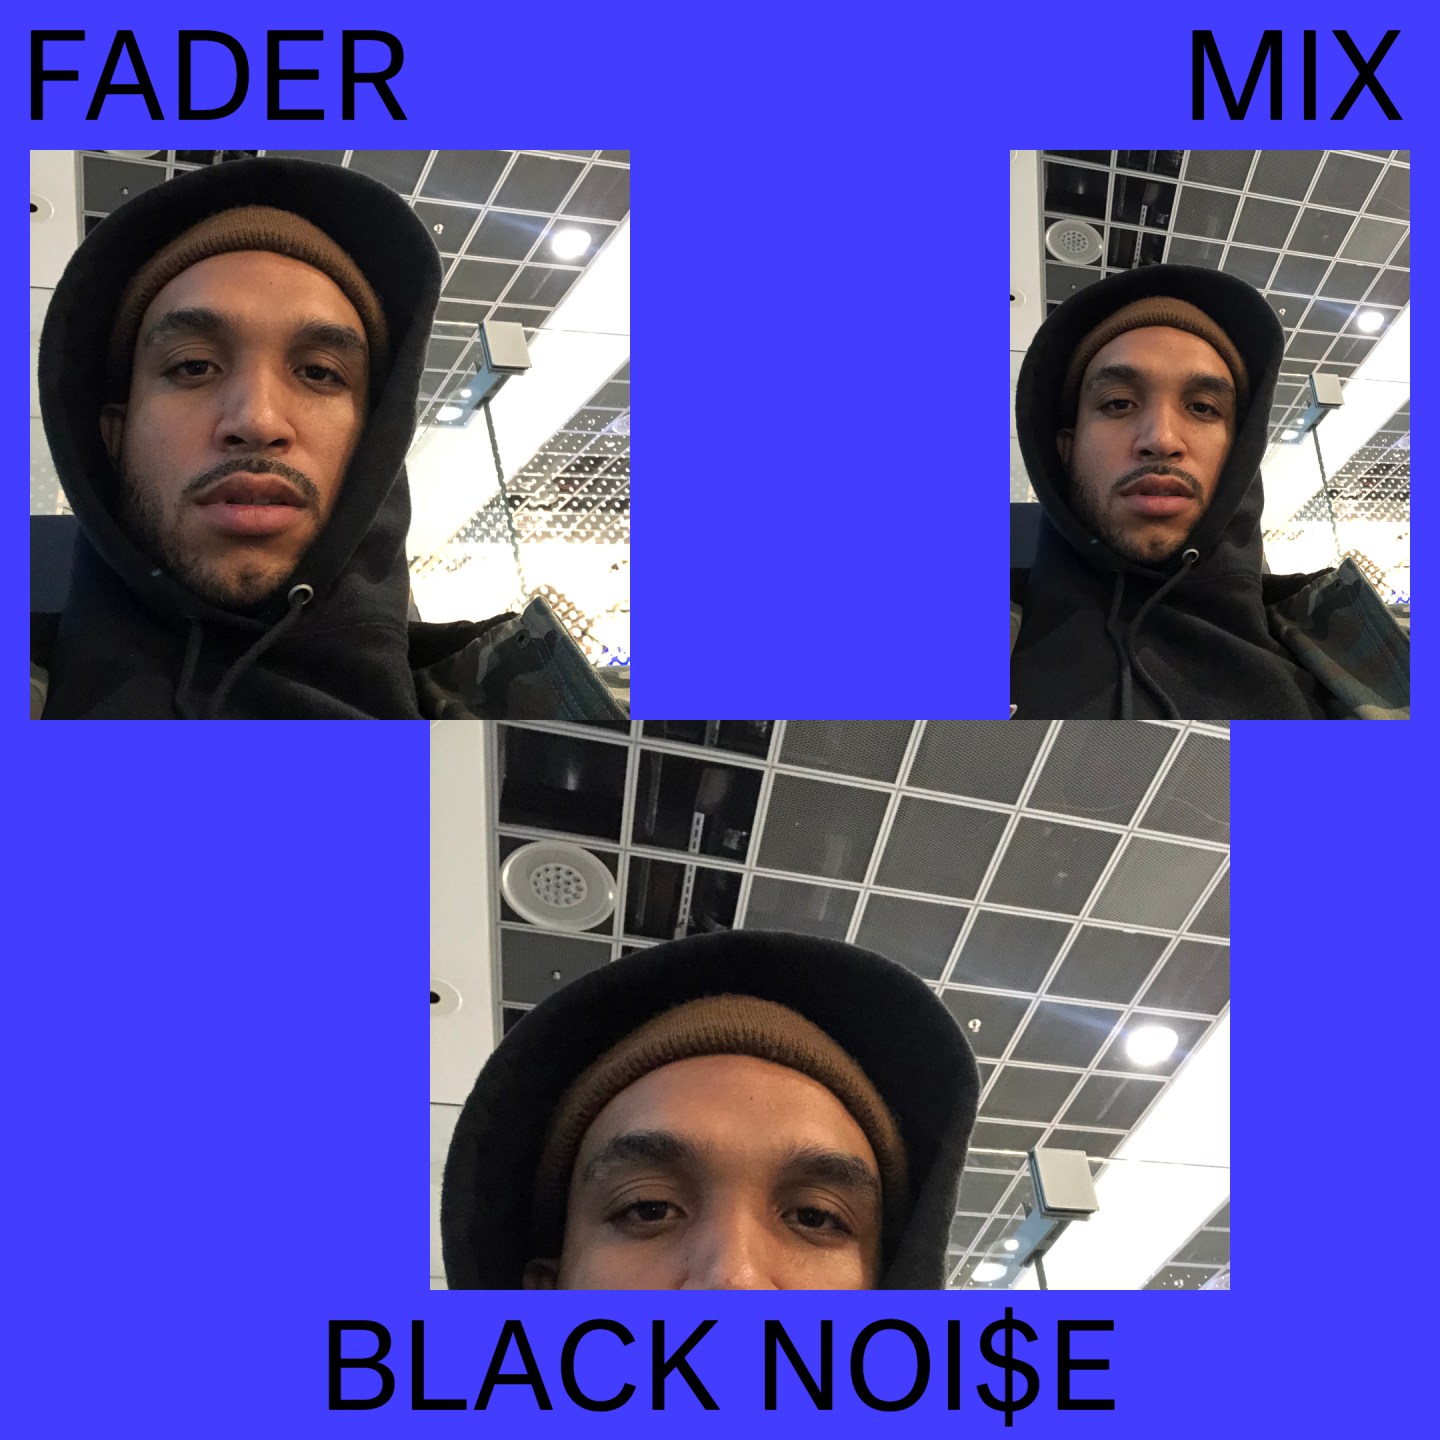 Listen to a new FADER Mix by Black Noi$e